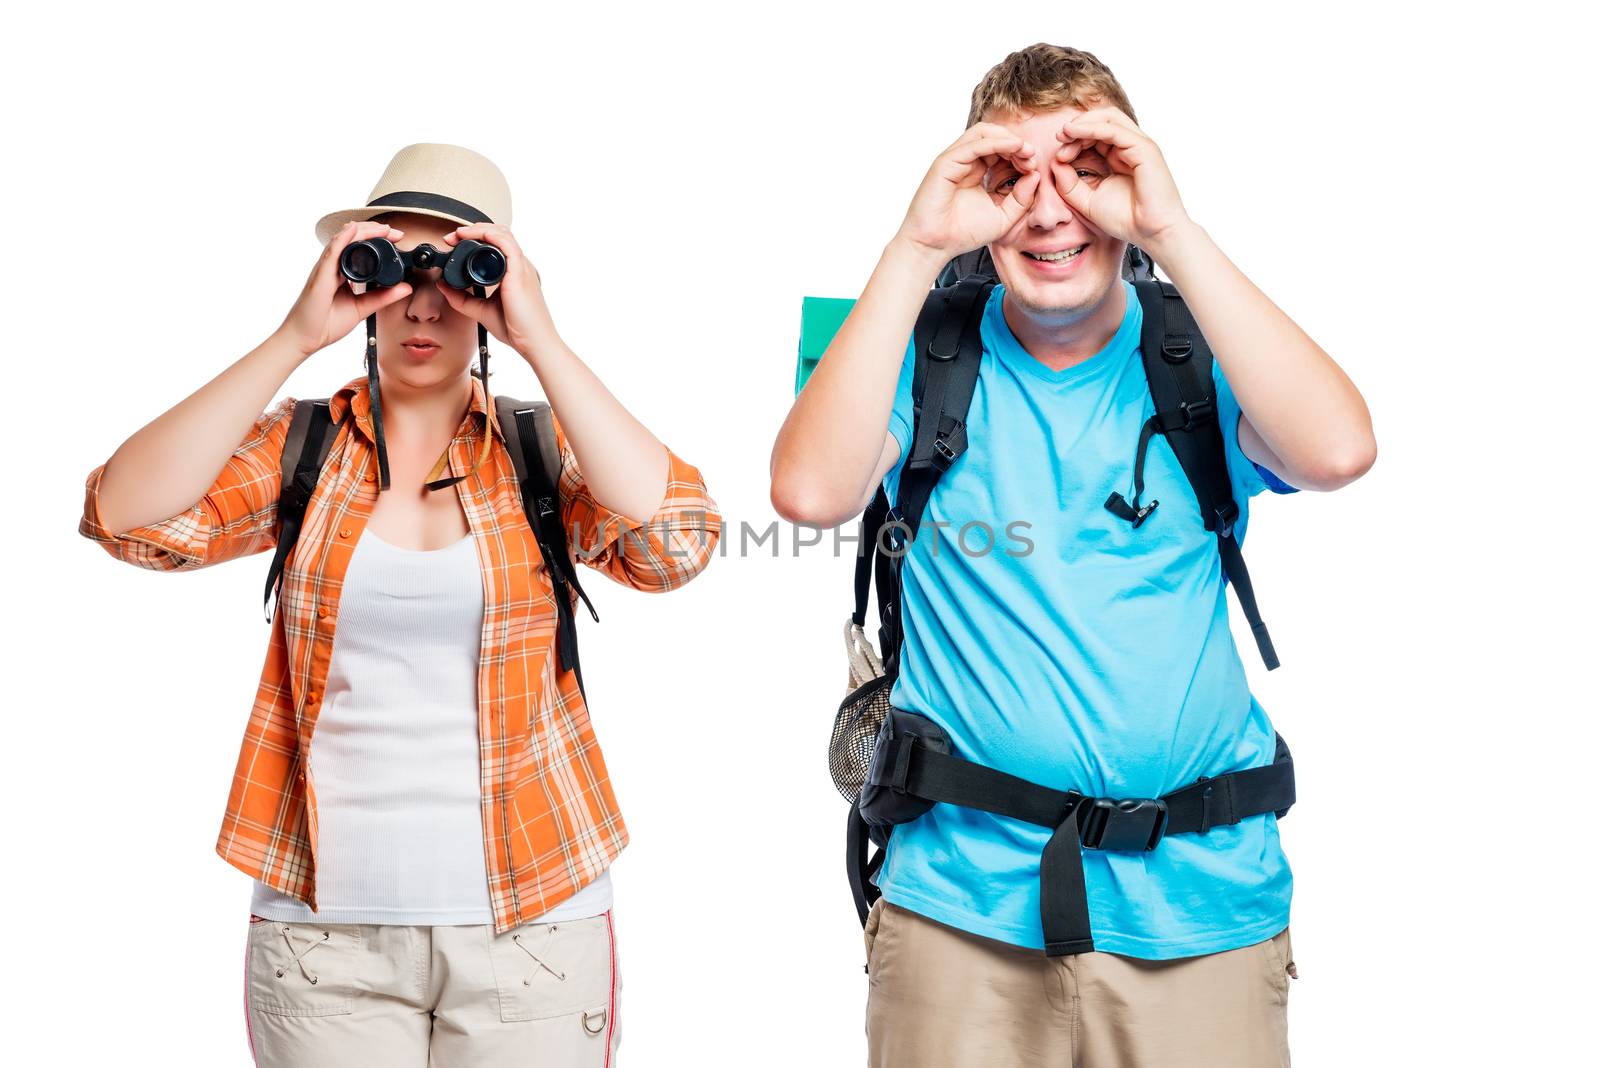 Man and woman with binoculars, funny photo on a white background